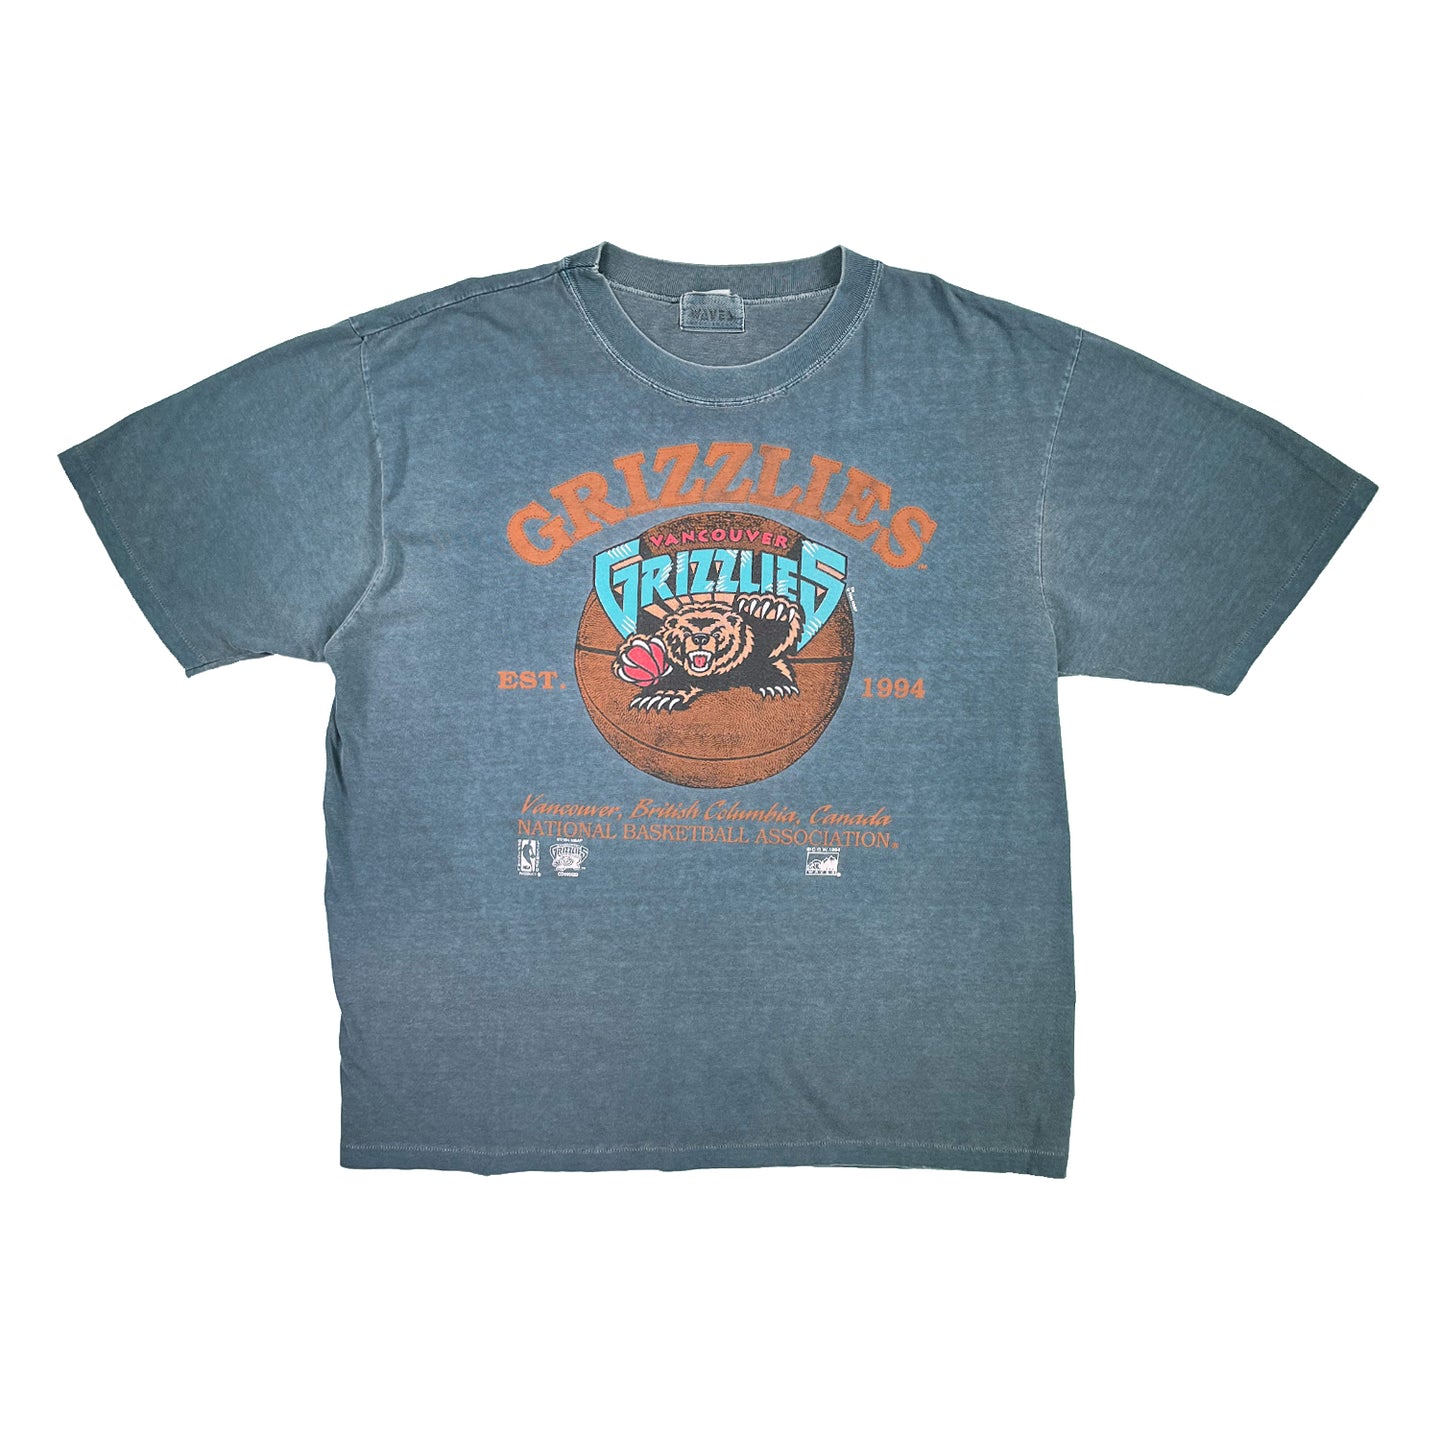 1994 Vancouver Grizzlies Waves tee XL